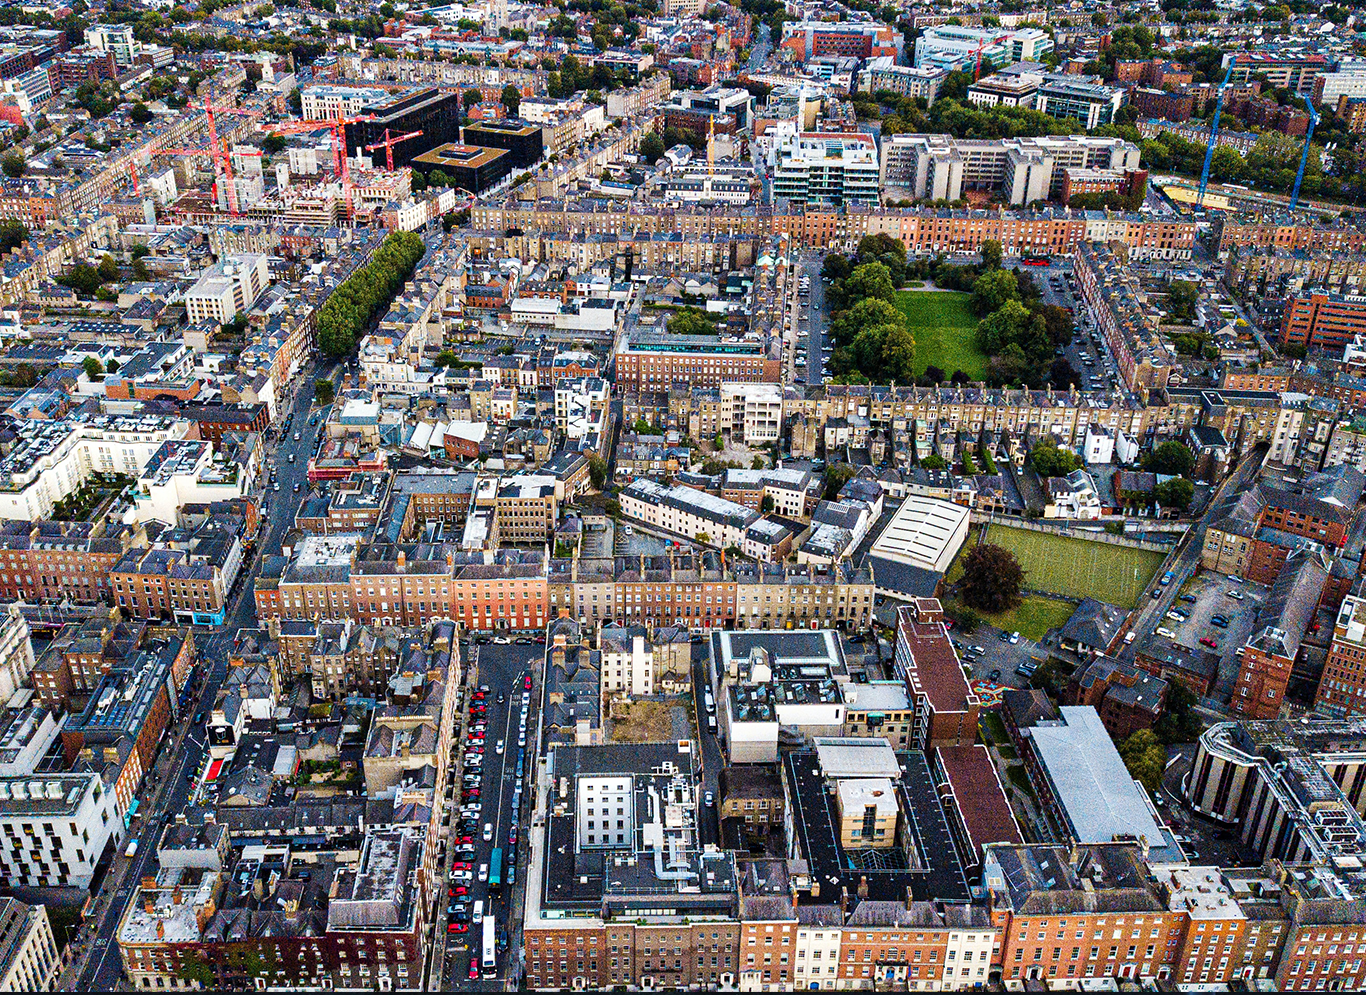 Drone view of Dublin